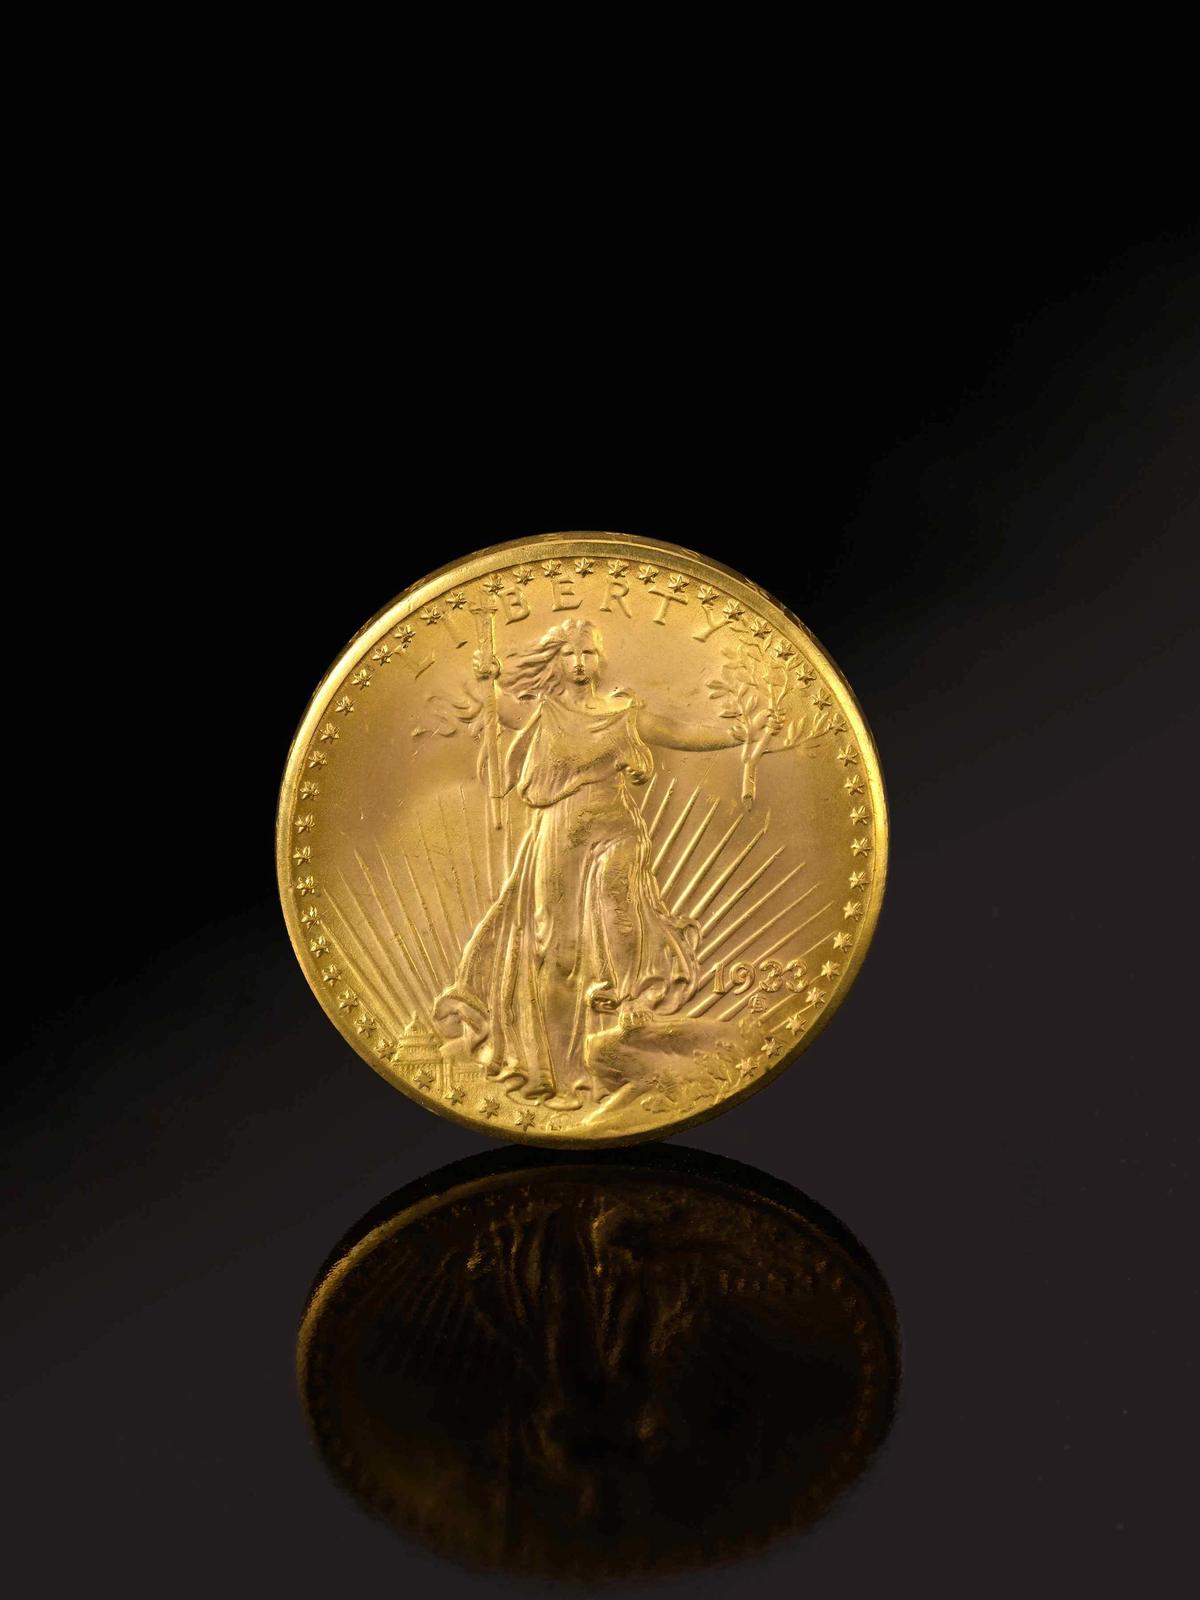 The 1933 Double Eagle Coin Courtesy of Sotheby's. Photography by SquareMoose